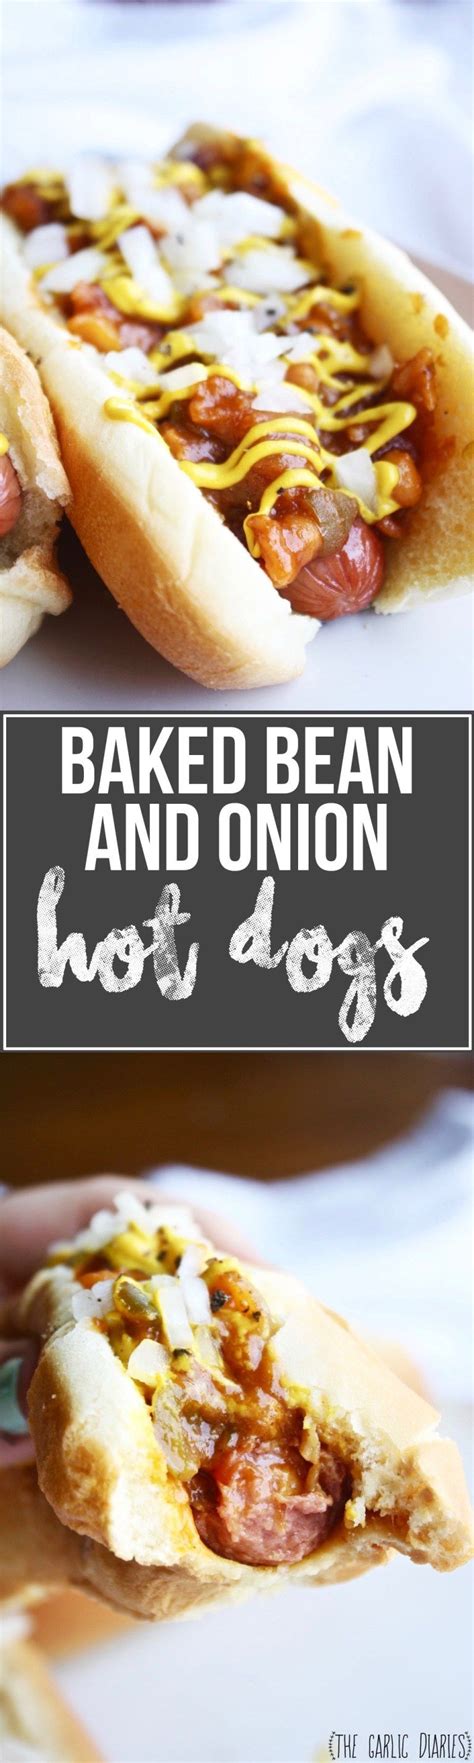 Melt butter in a cast iron skillet. Baked Bean and Onion Dogs | Recipe | Baked beans, Hot dog ...